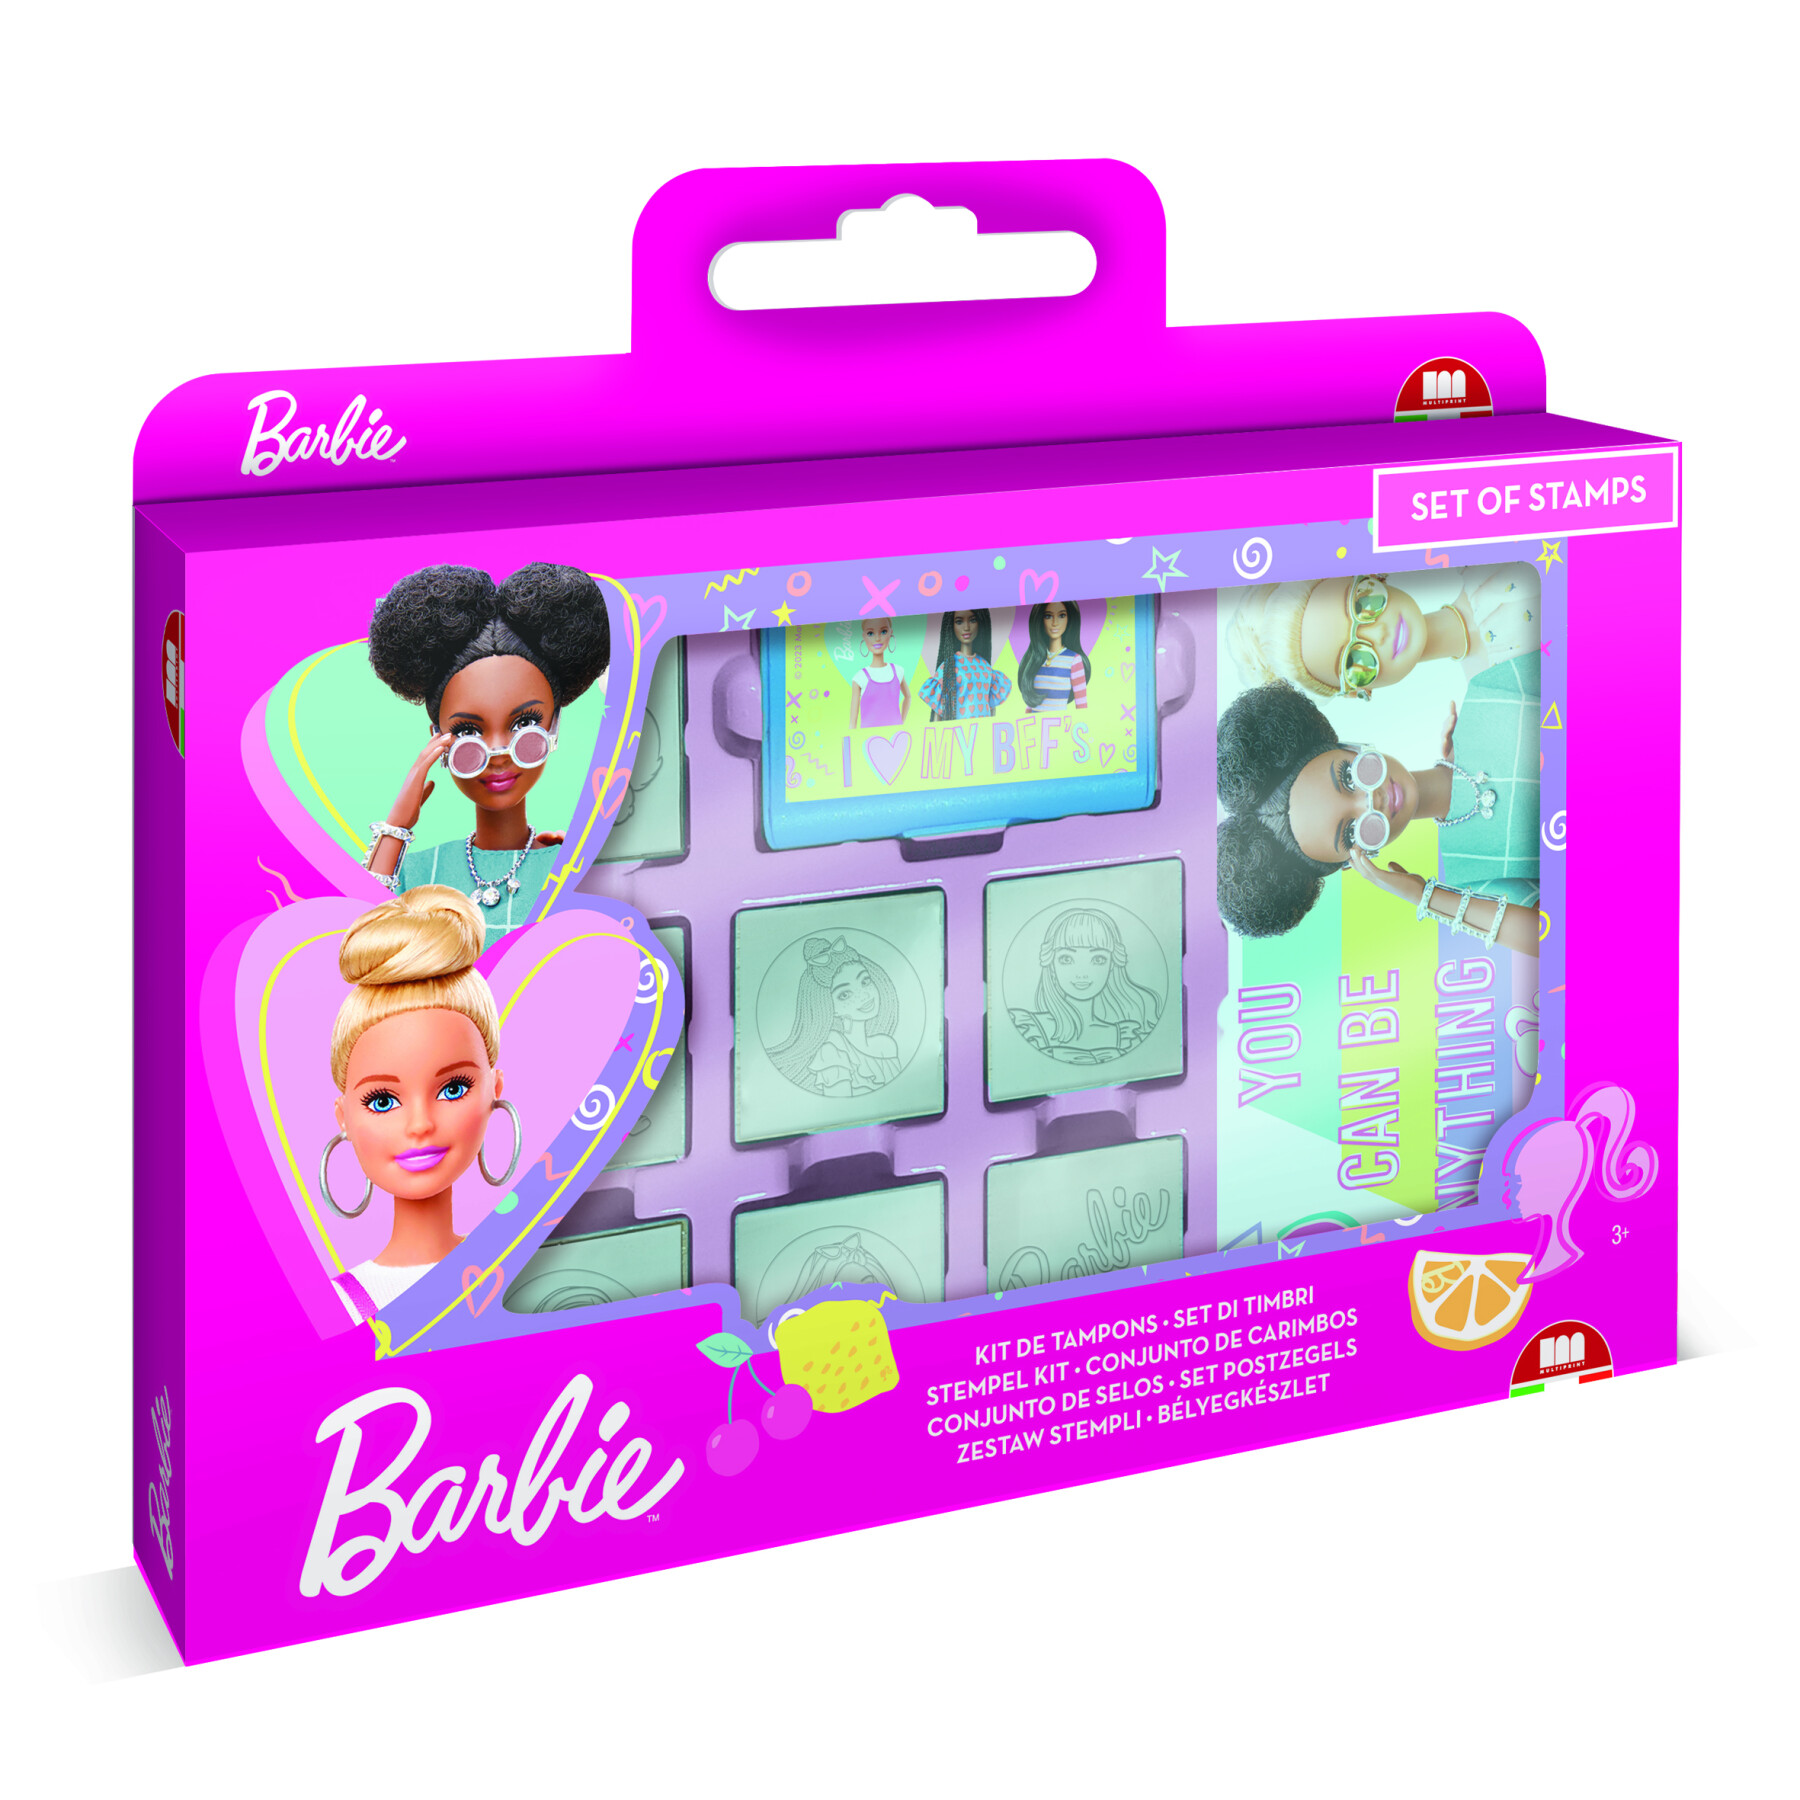 Multiprint - valigetta 7 timbri barbie per bambini made in italy